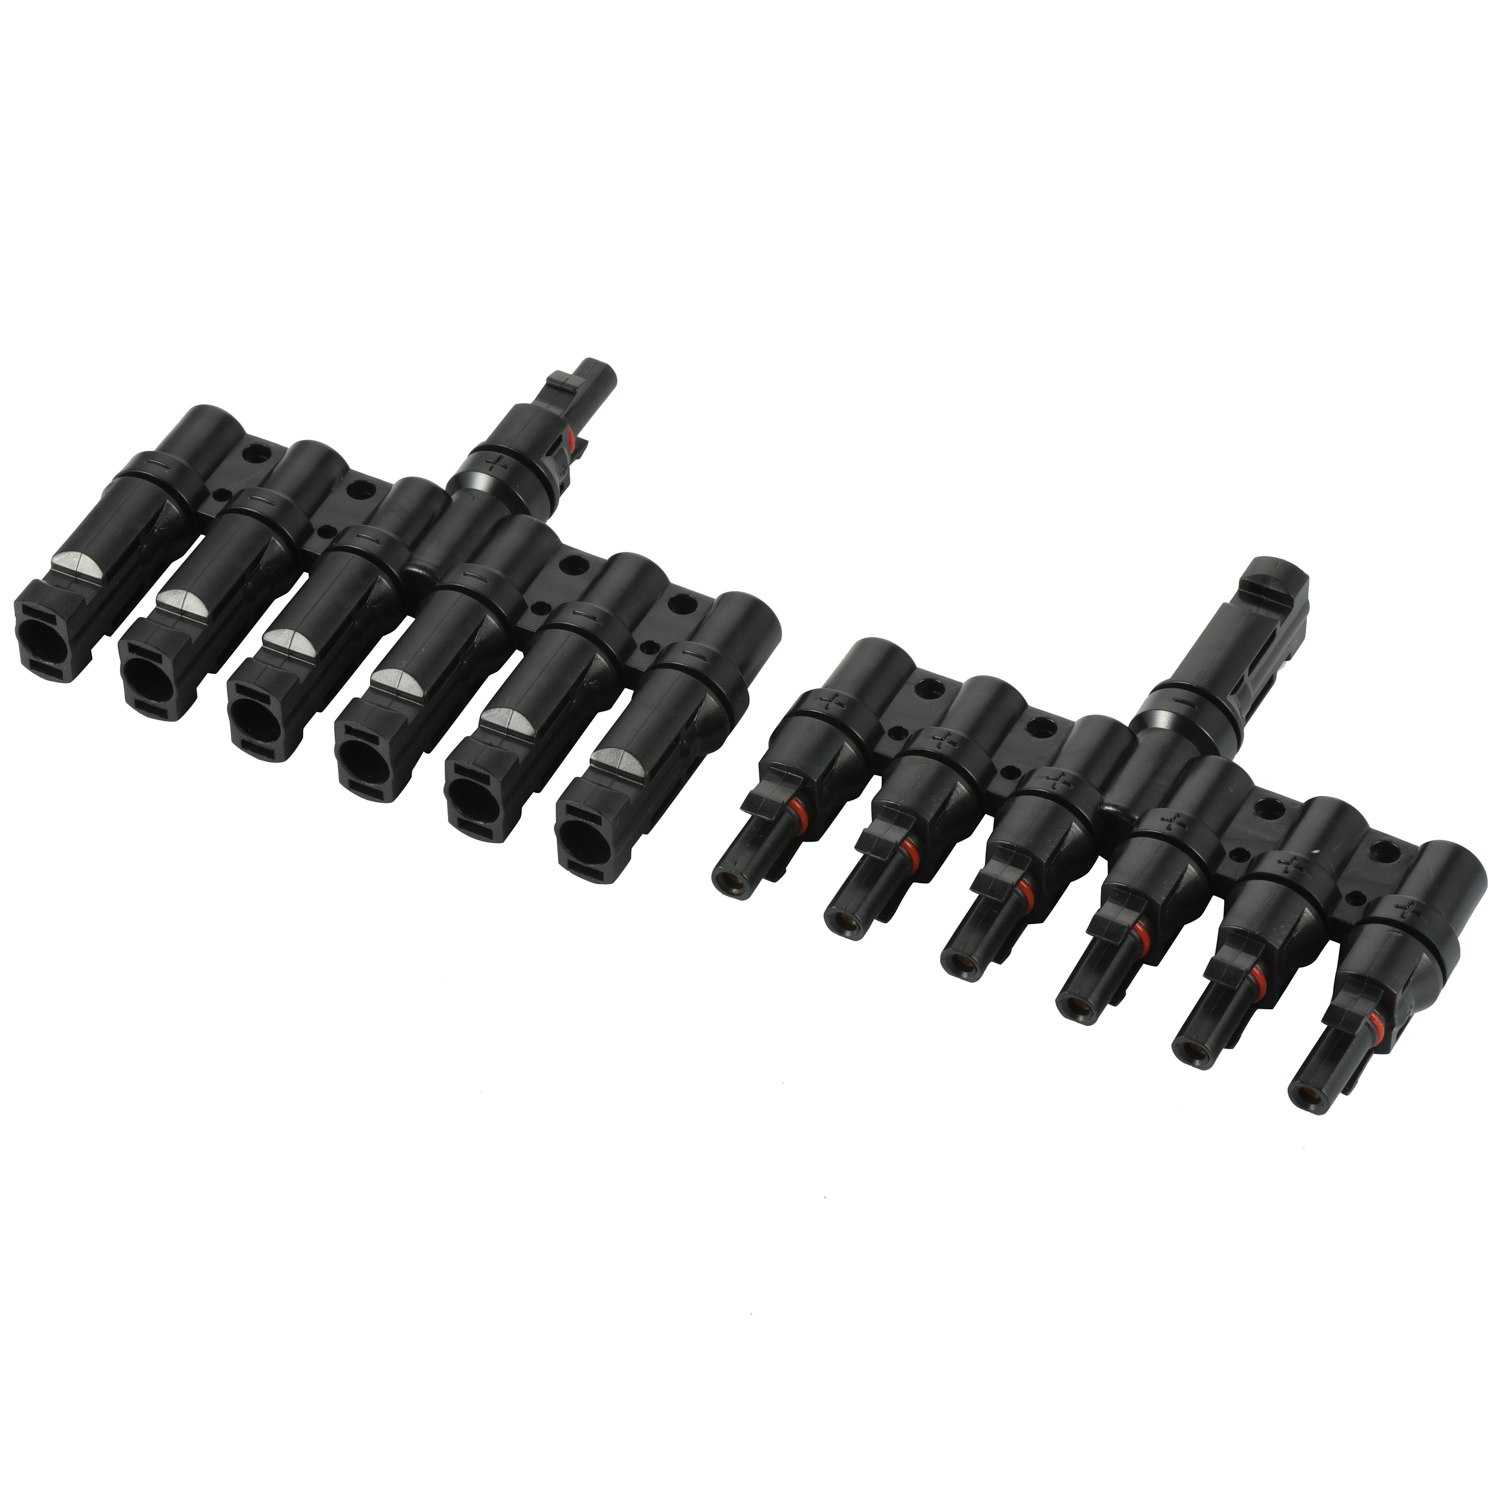 6-way 6 in 1 Solar PV MC4 T branch  socket plug Connector Adaptor Coupler TUV UL Approved